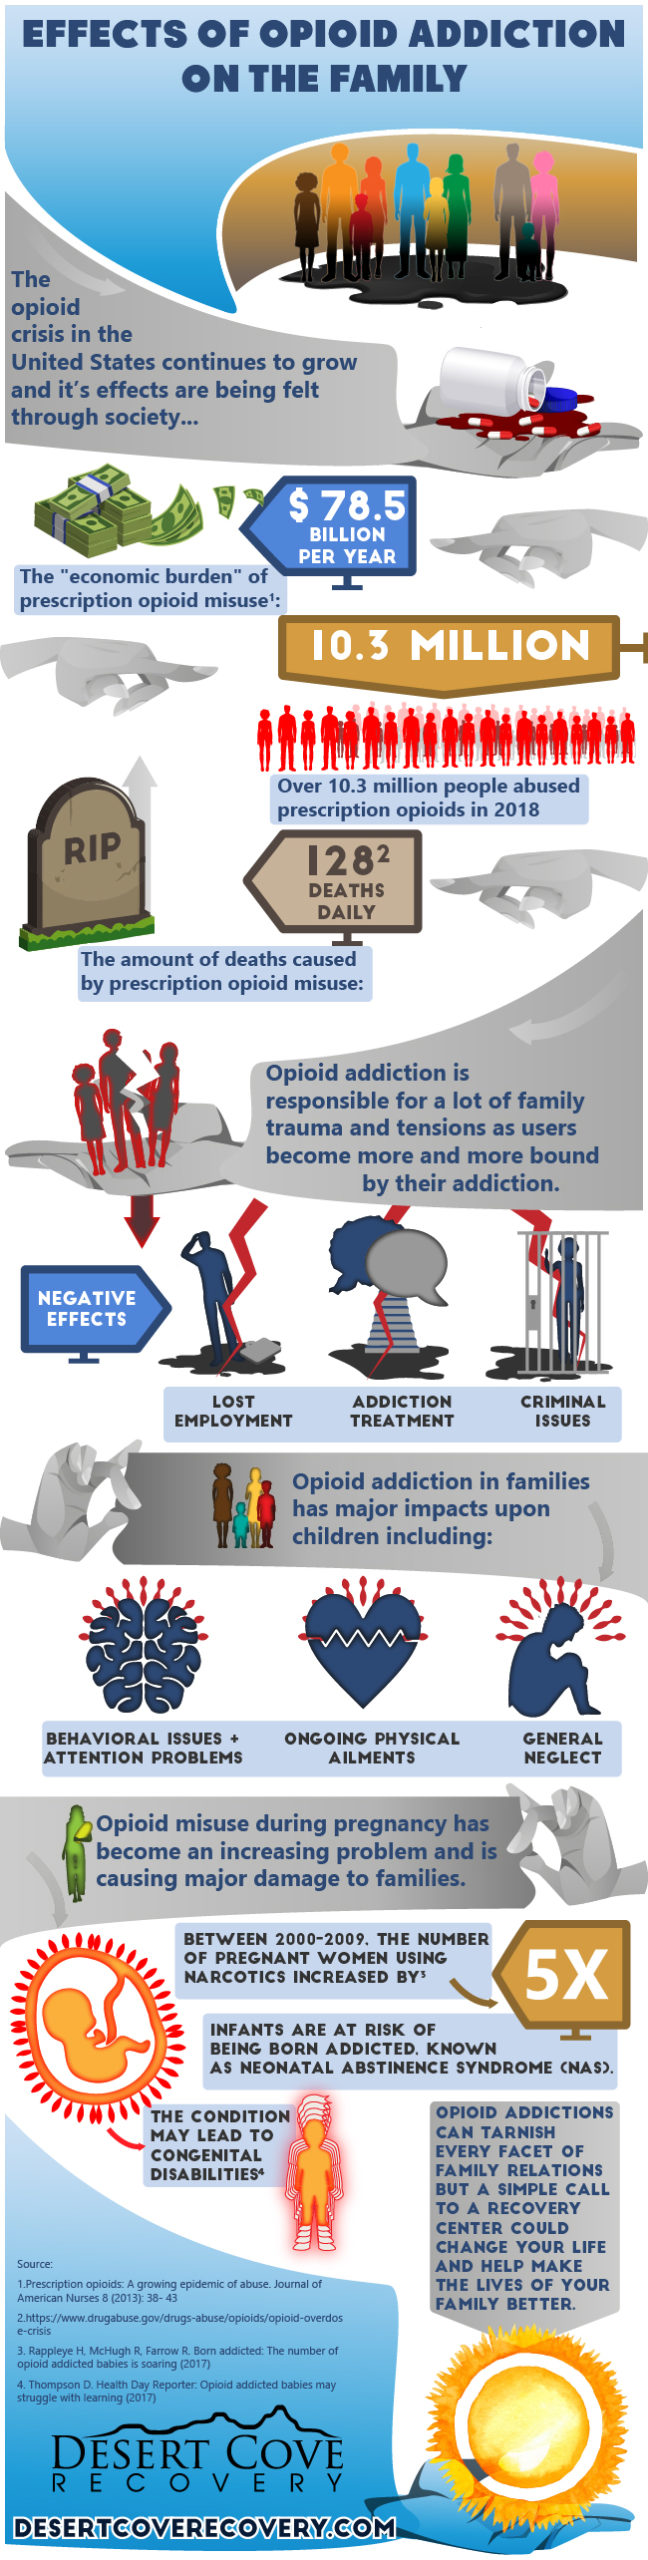 Effects of Opioid addiction on the family and how treatment center in arizona can help